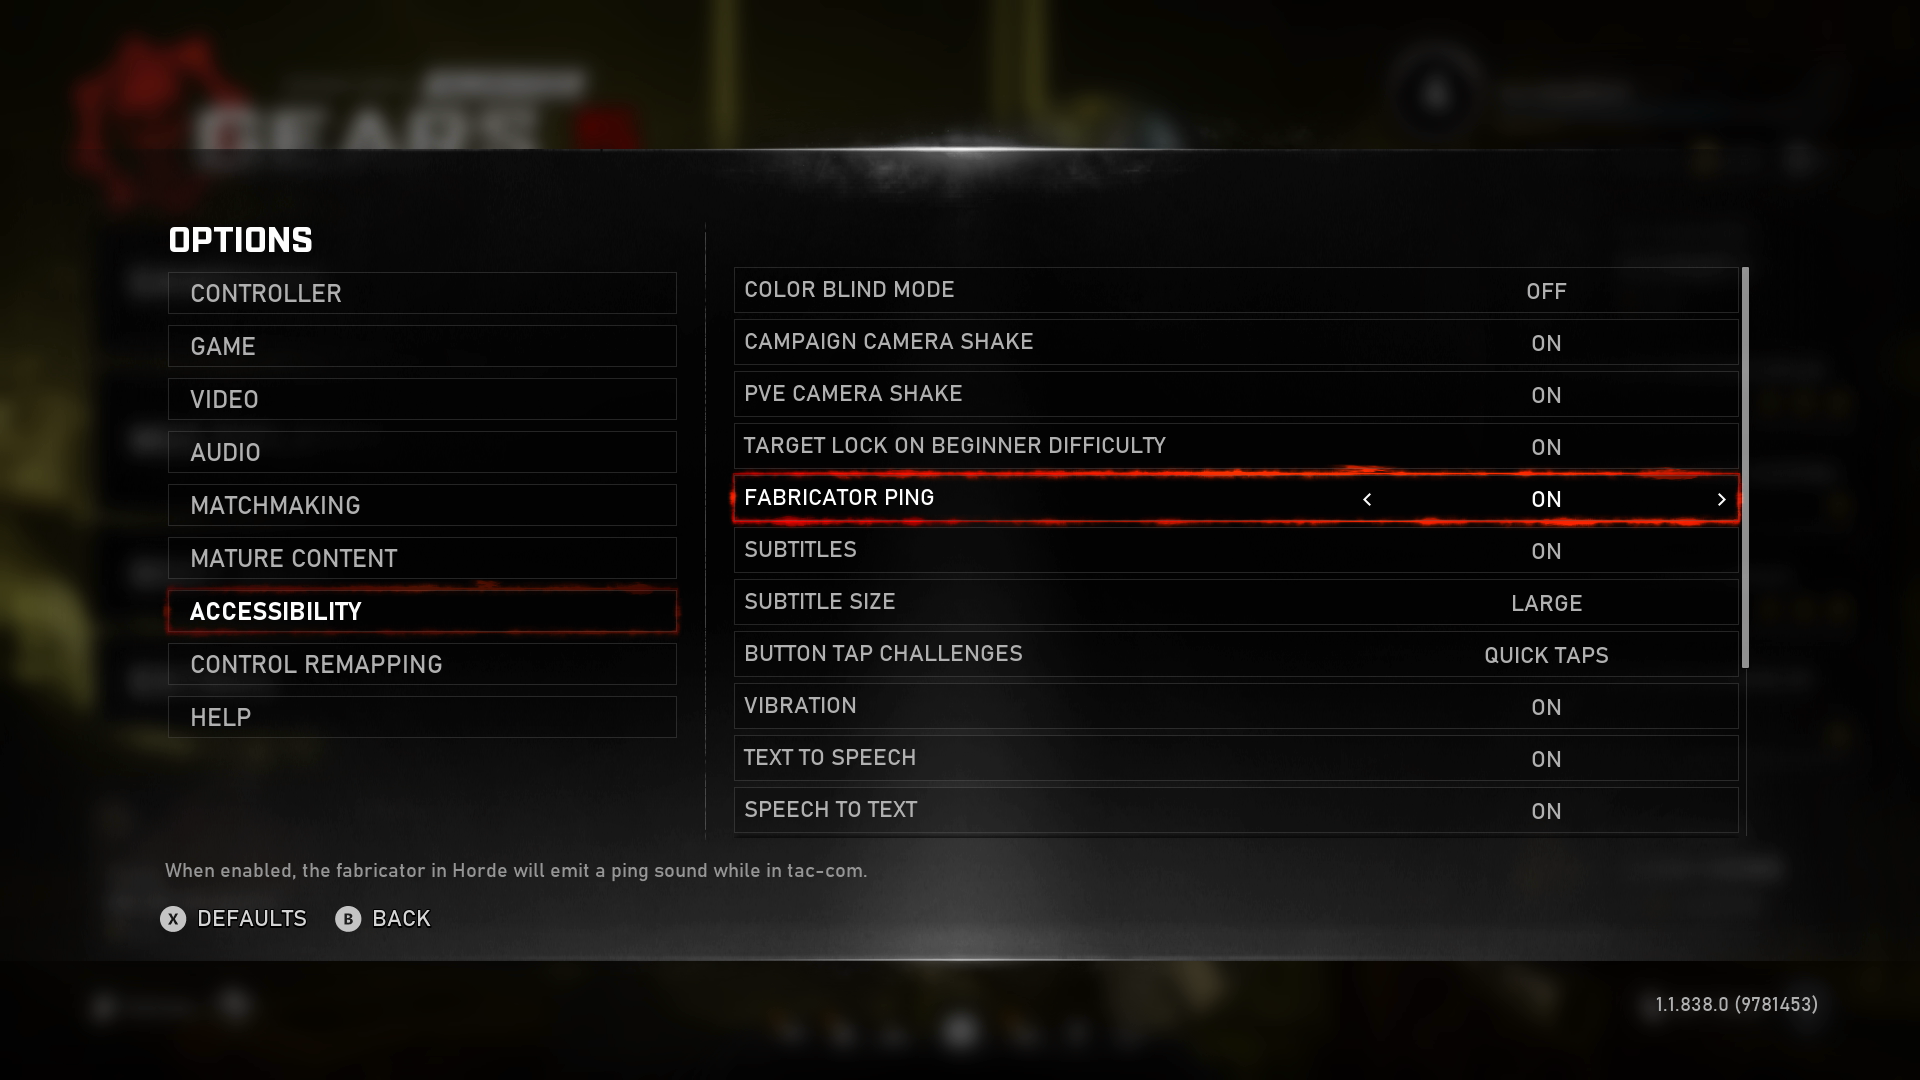 Gears 5 accessibility settings. The fabricator ping option is focused, and it set to on.